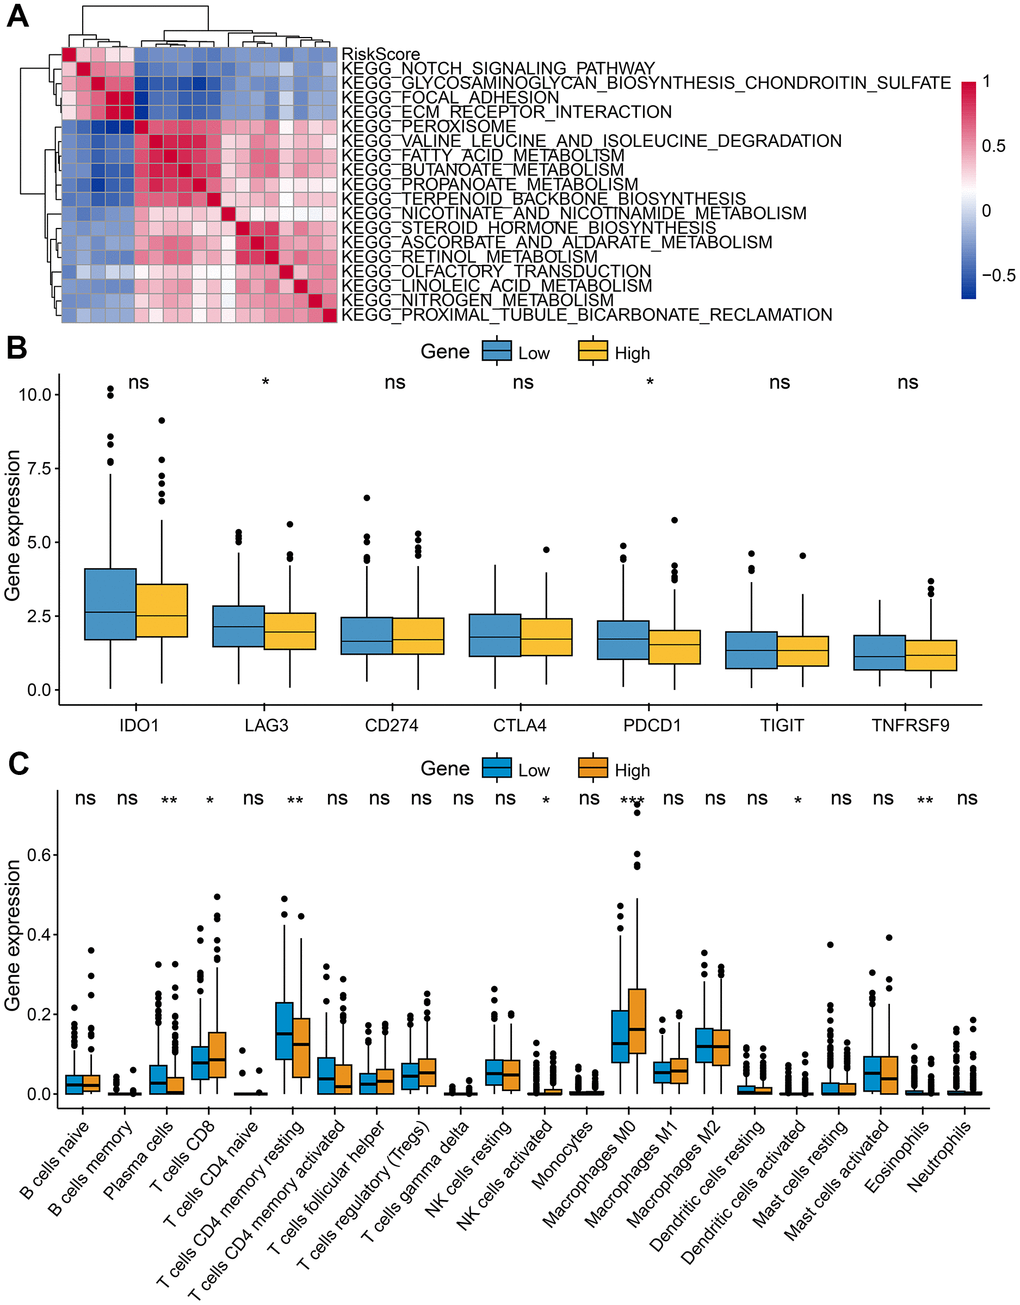 Characteristics of tumor immune microenvironment. (A) Heatmap showed the relationship between risk score and immune functions. (B) Immune checkpoint expressed differently between low-risk and high-risk groups. (C) Tumor-infiltrating immune cells expressed differently between low-risk and high-risk groups.